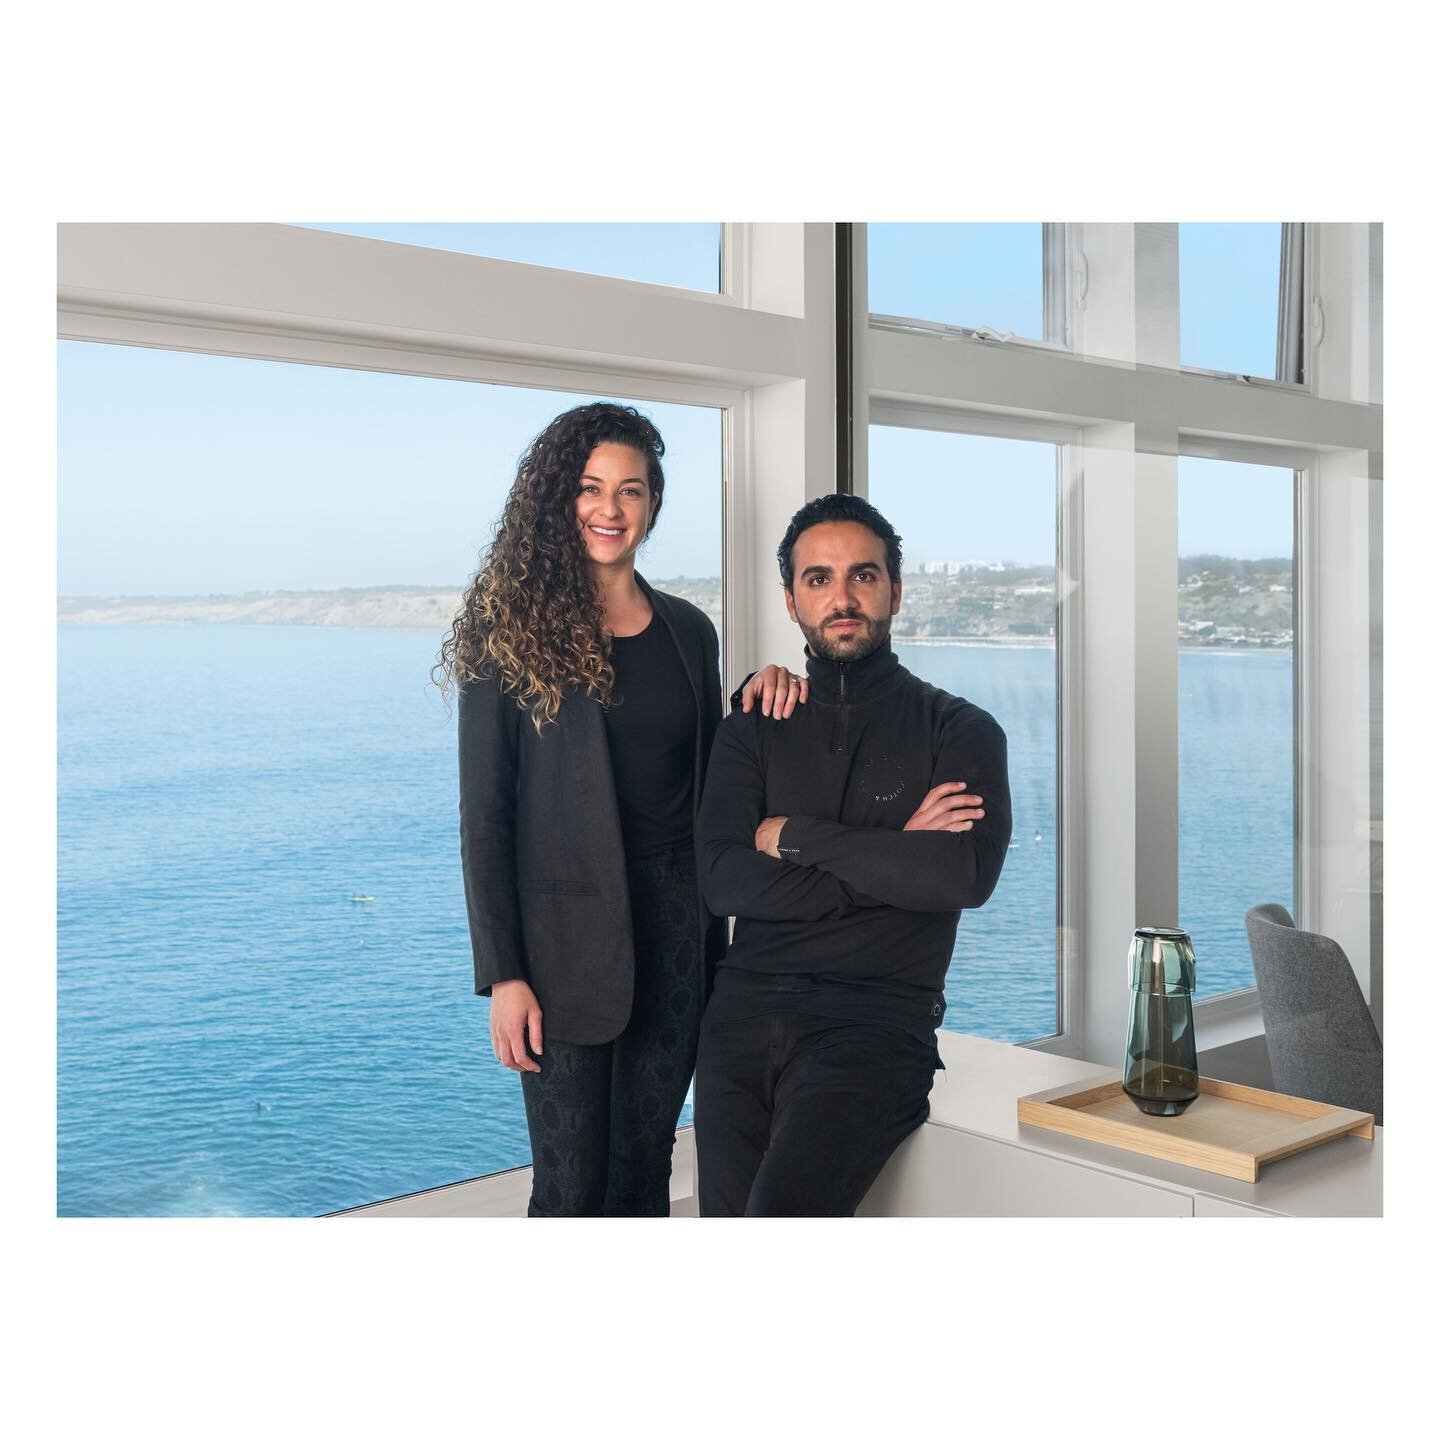 SD Design Studio is a husband-and-wife design studio. Co-Founded by Salomon &amp; Dalia. Born in Mexico City, we are global citizens based in San Diego. Creating sophisticated projects with a distinct focus on comfort.

Together we specialize in cura